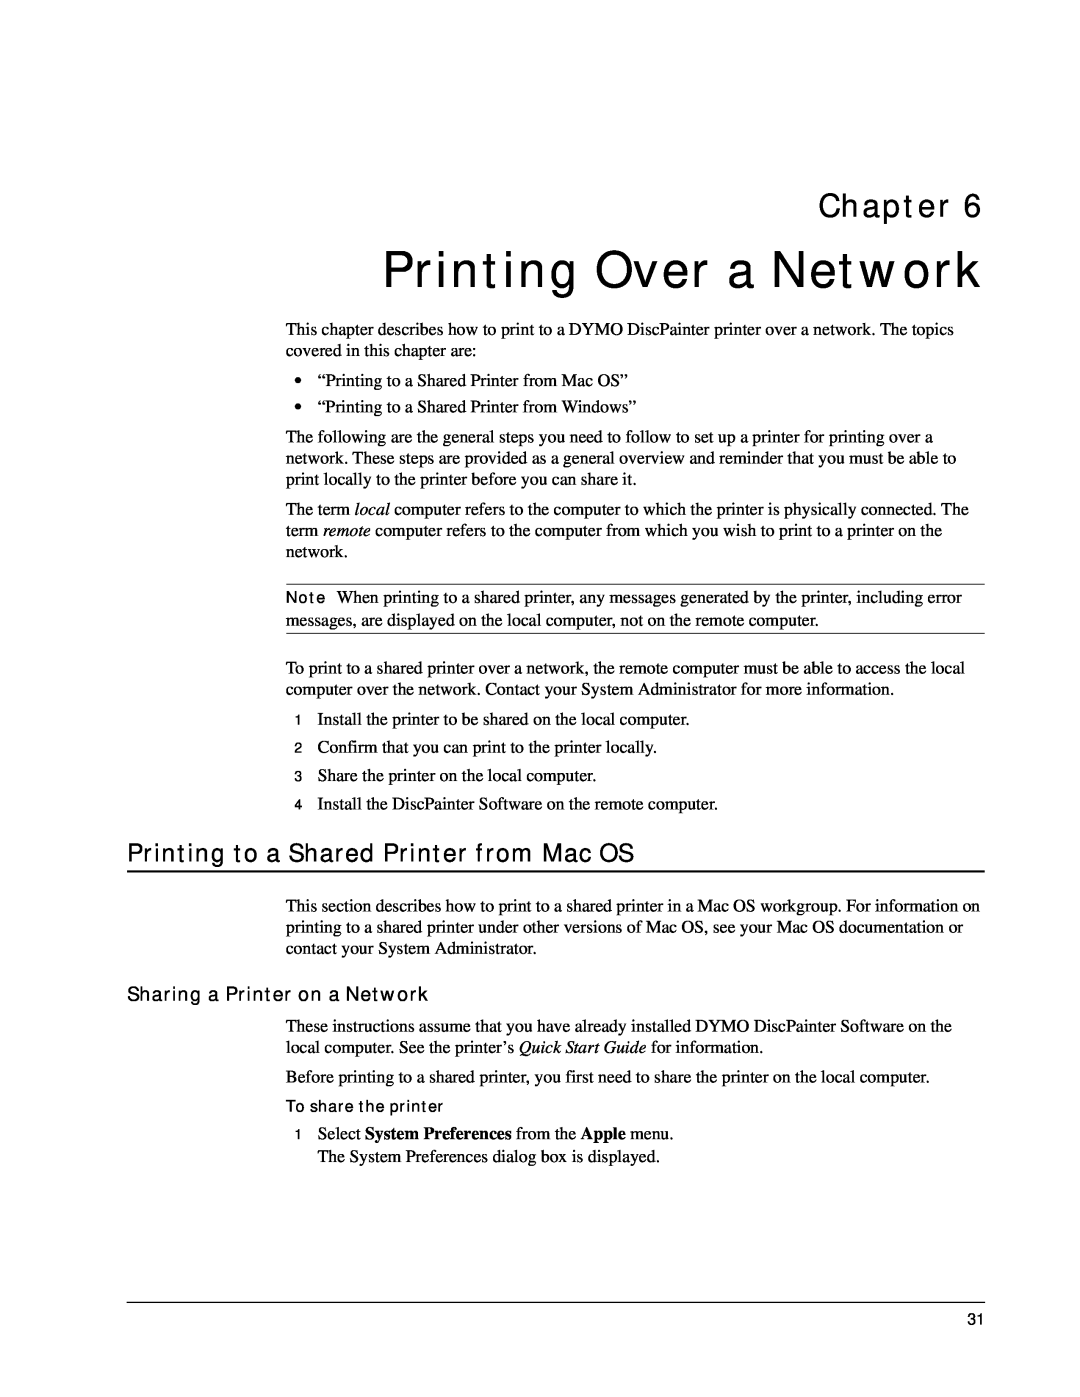 Dymo DiscPainter manual Printing Over a Network, Printing to a Shared Printer from Mac OS, Sharing a Printer on a Network 